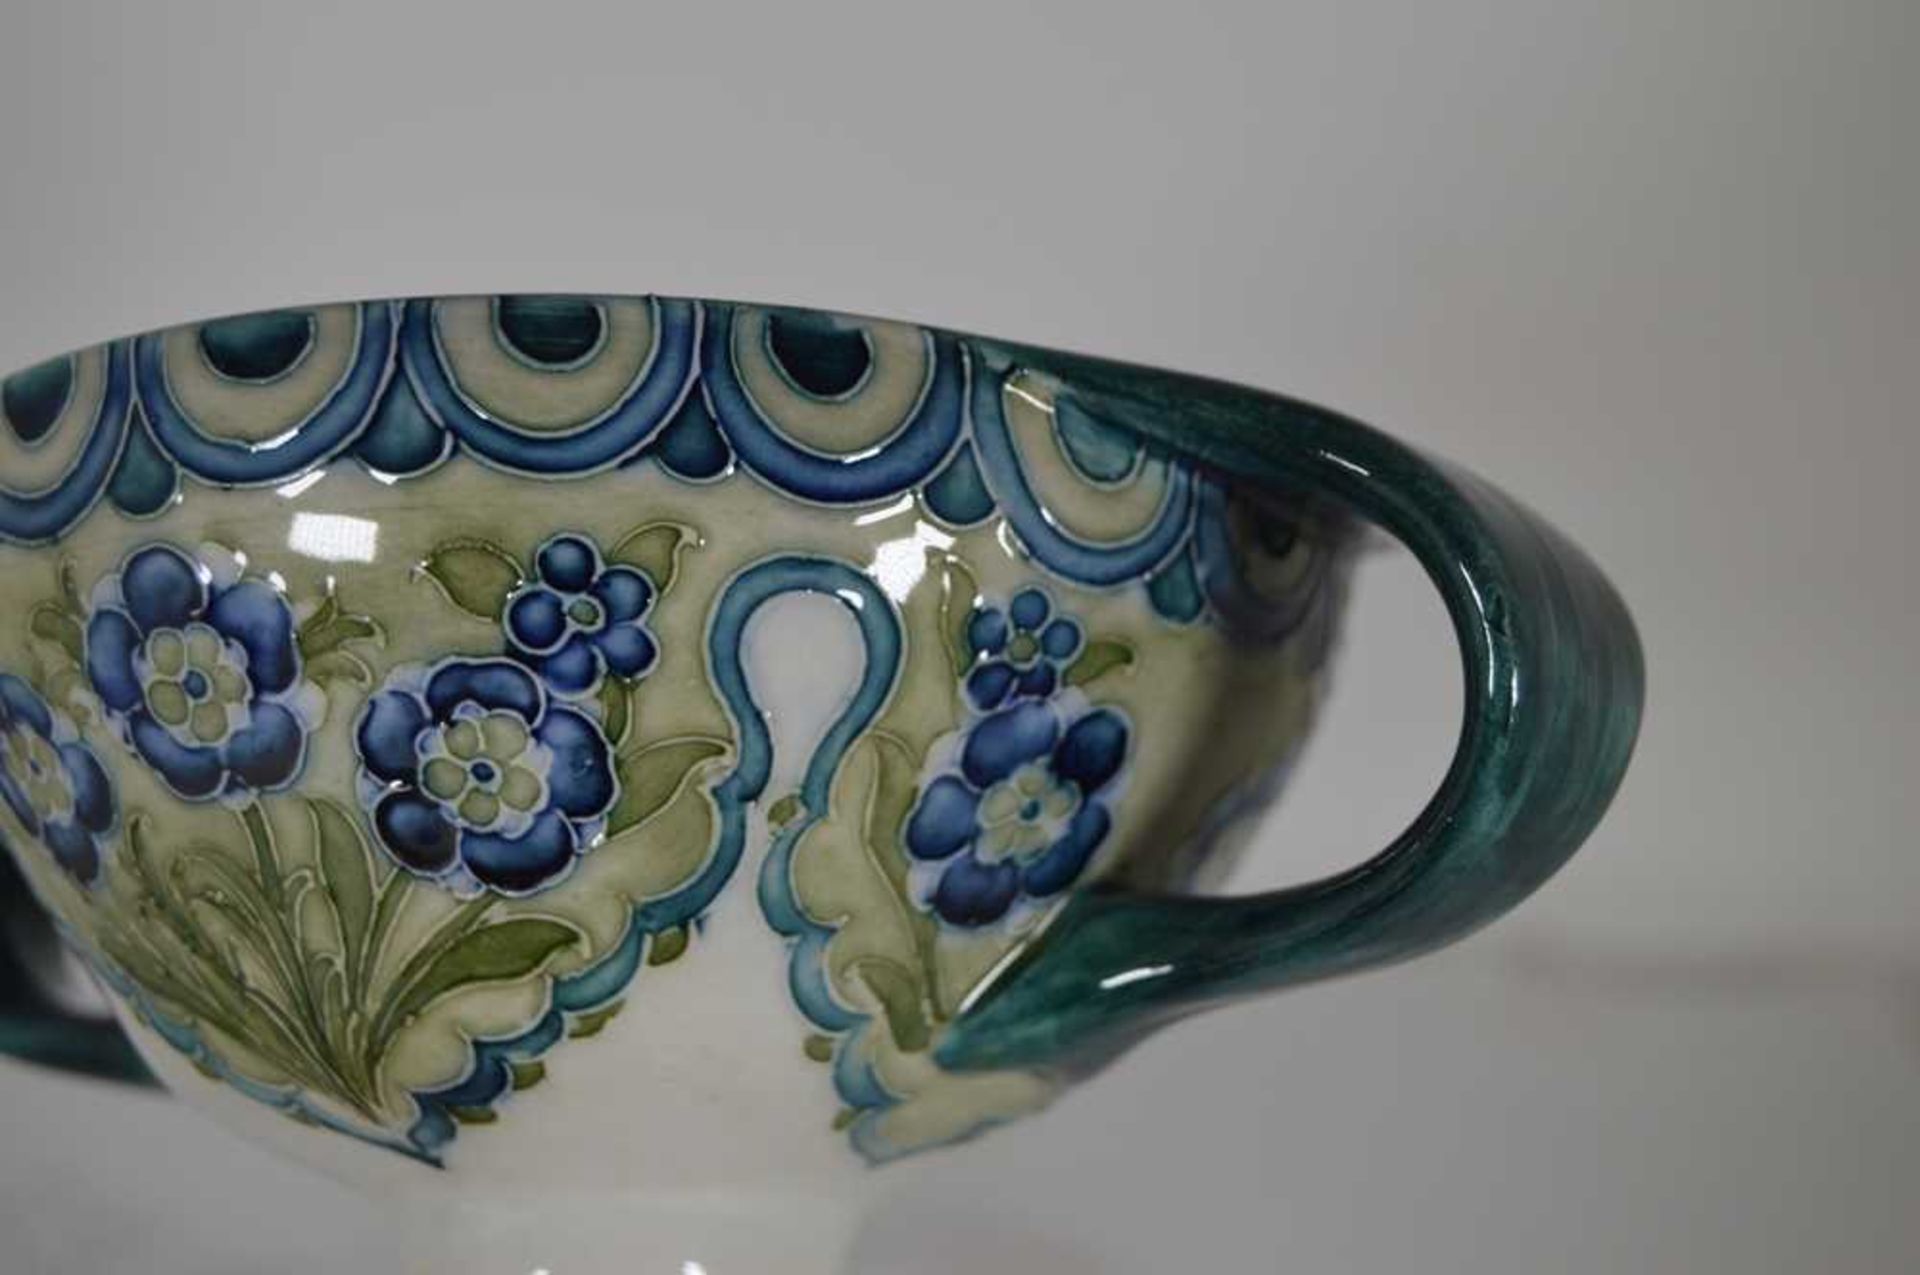 WILLIAM MOORCROFT (1872-1945) FOR JAMES MACINTYRE & CO. ‘FLORIAN WARE’ FORGET-ME-NOT AND TULIPS CHAL - Image 11 of 14